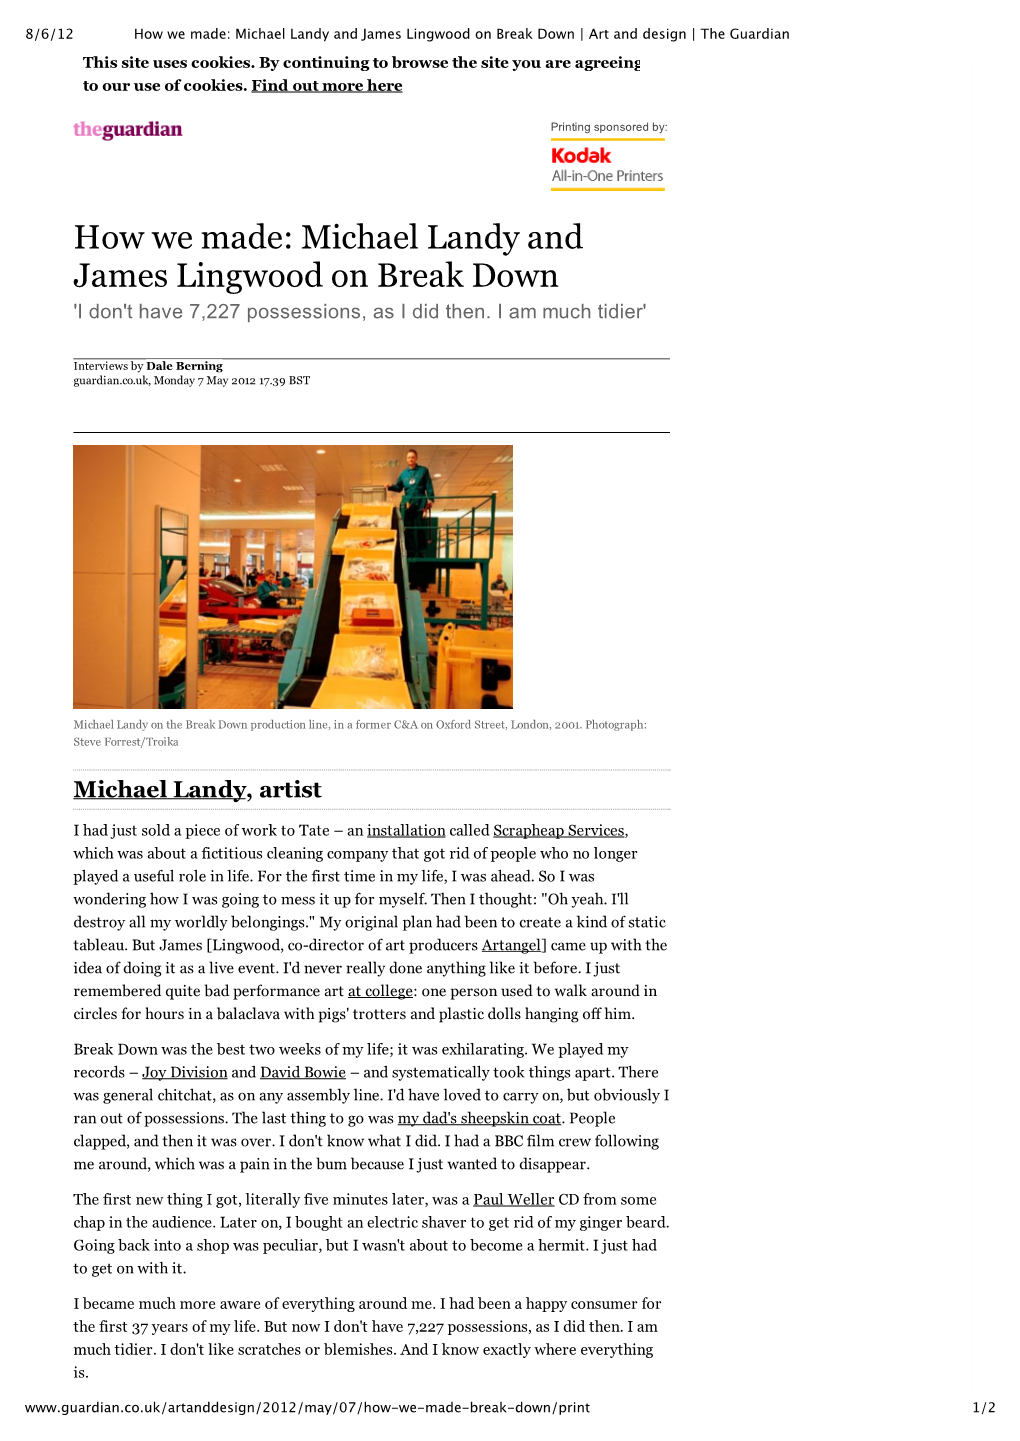 Michael Landy and James Lingwood on Break Down | Art and Design | the Guardian This Site Uses Cookies